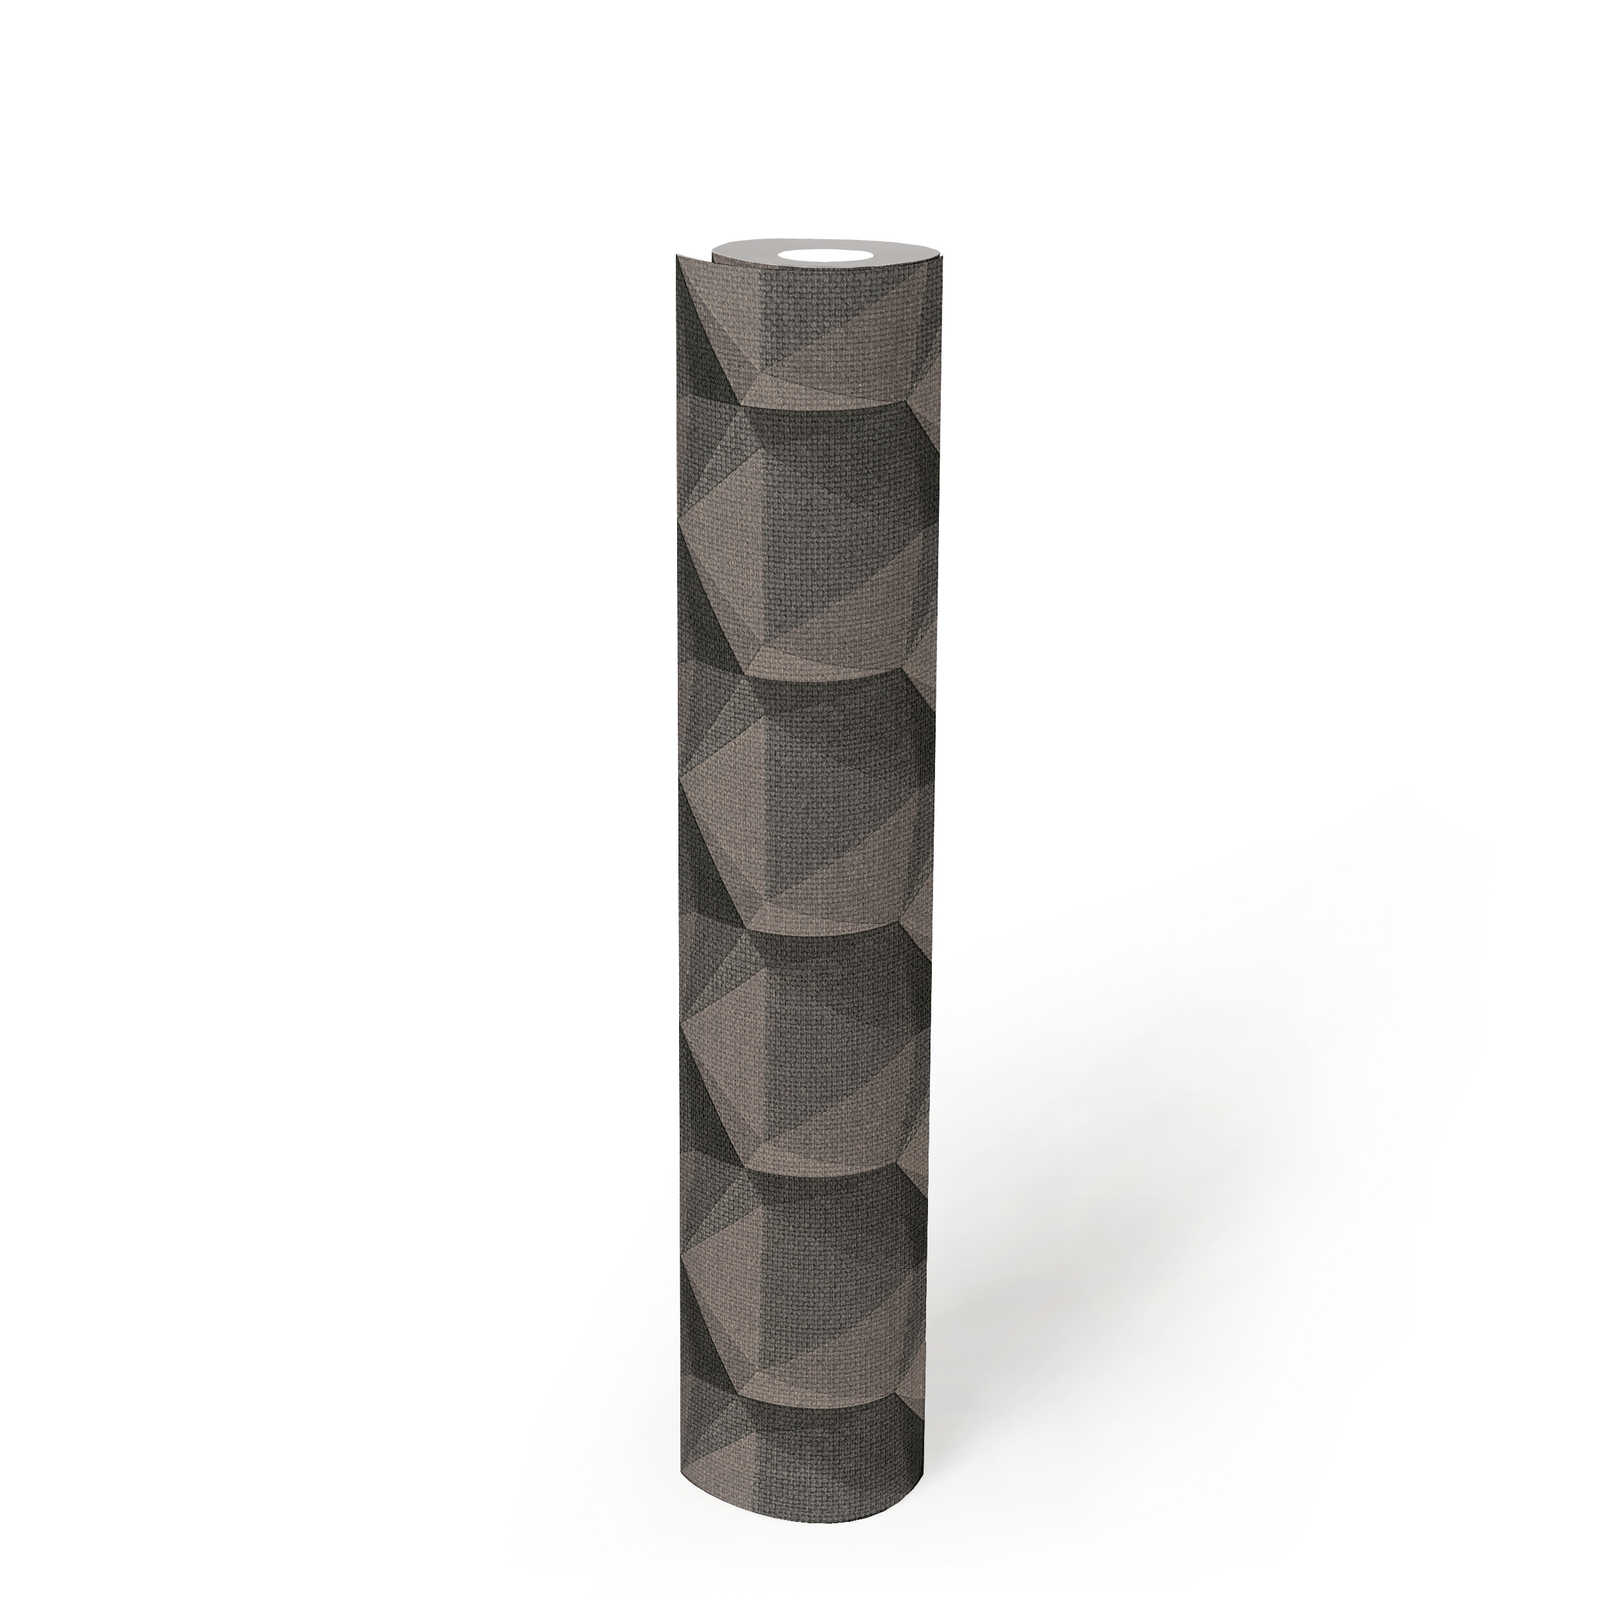             Graphic wallpaper 3D look with polygon pattern - grey, beige, black
        